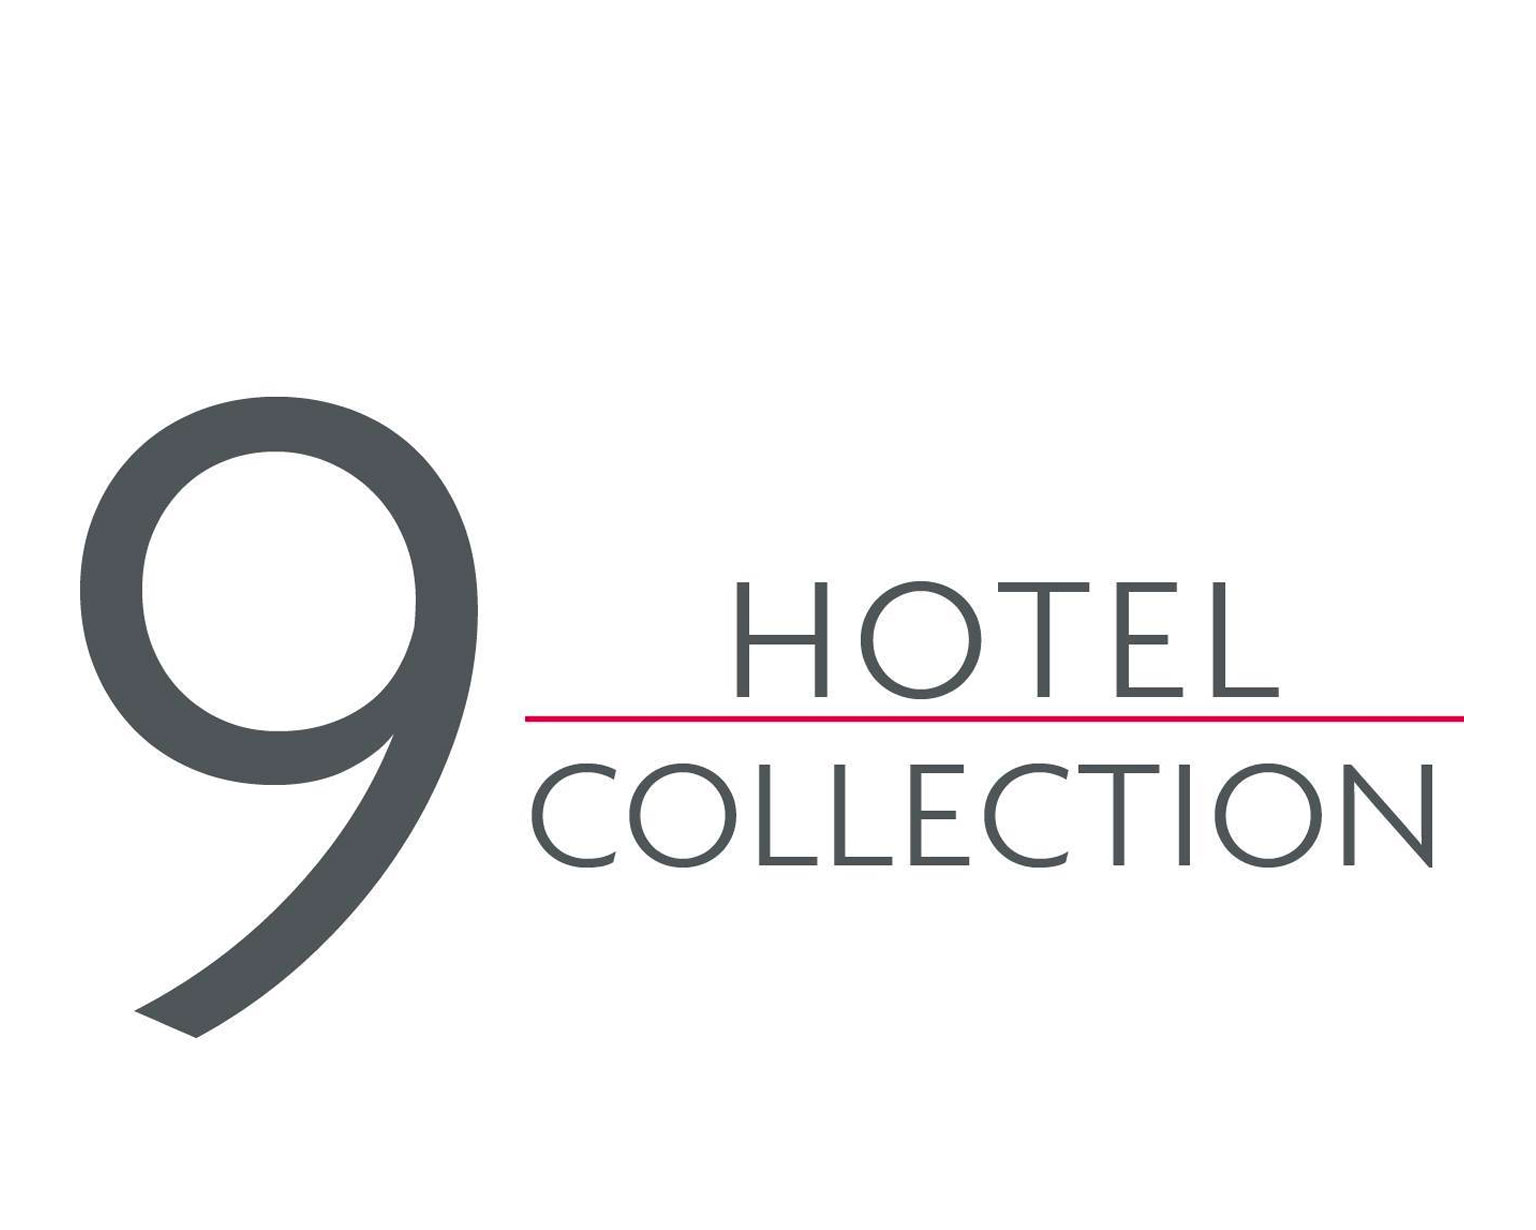 Témoignages 9 hotels collection